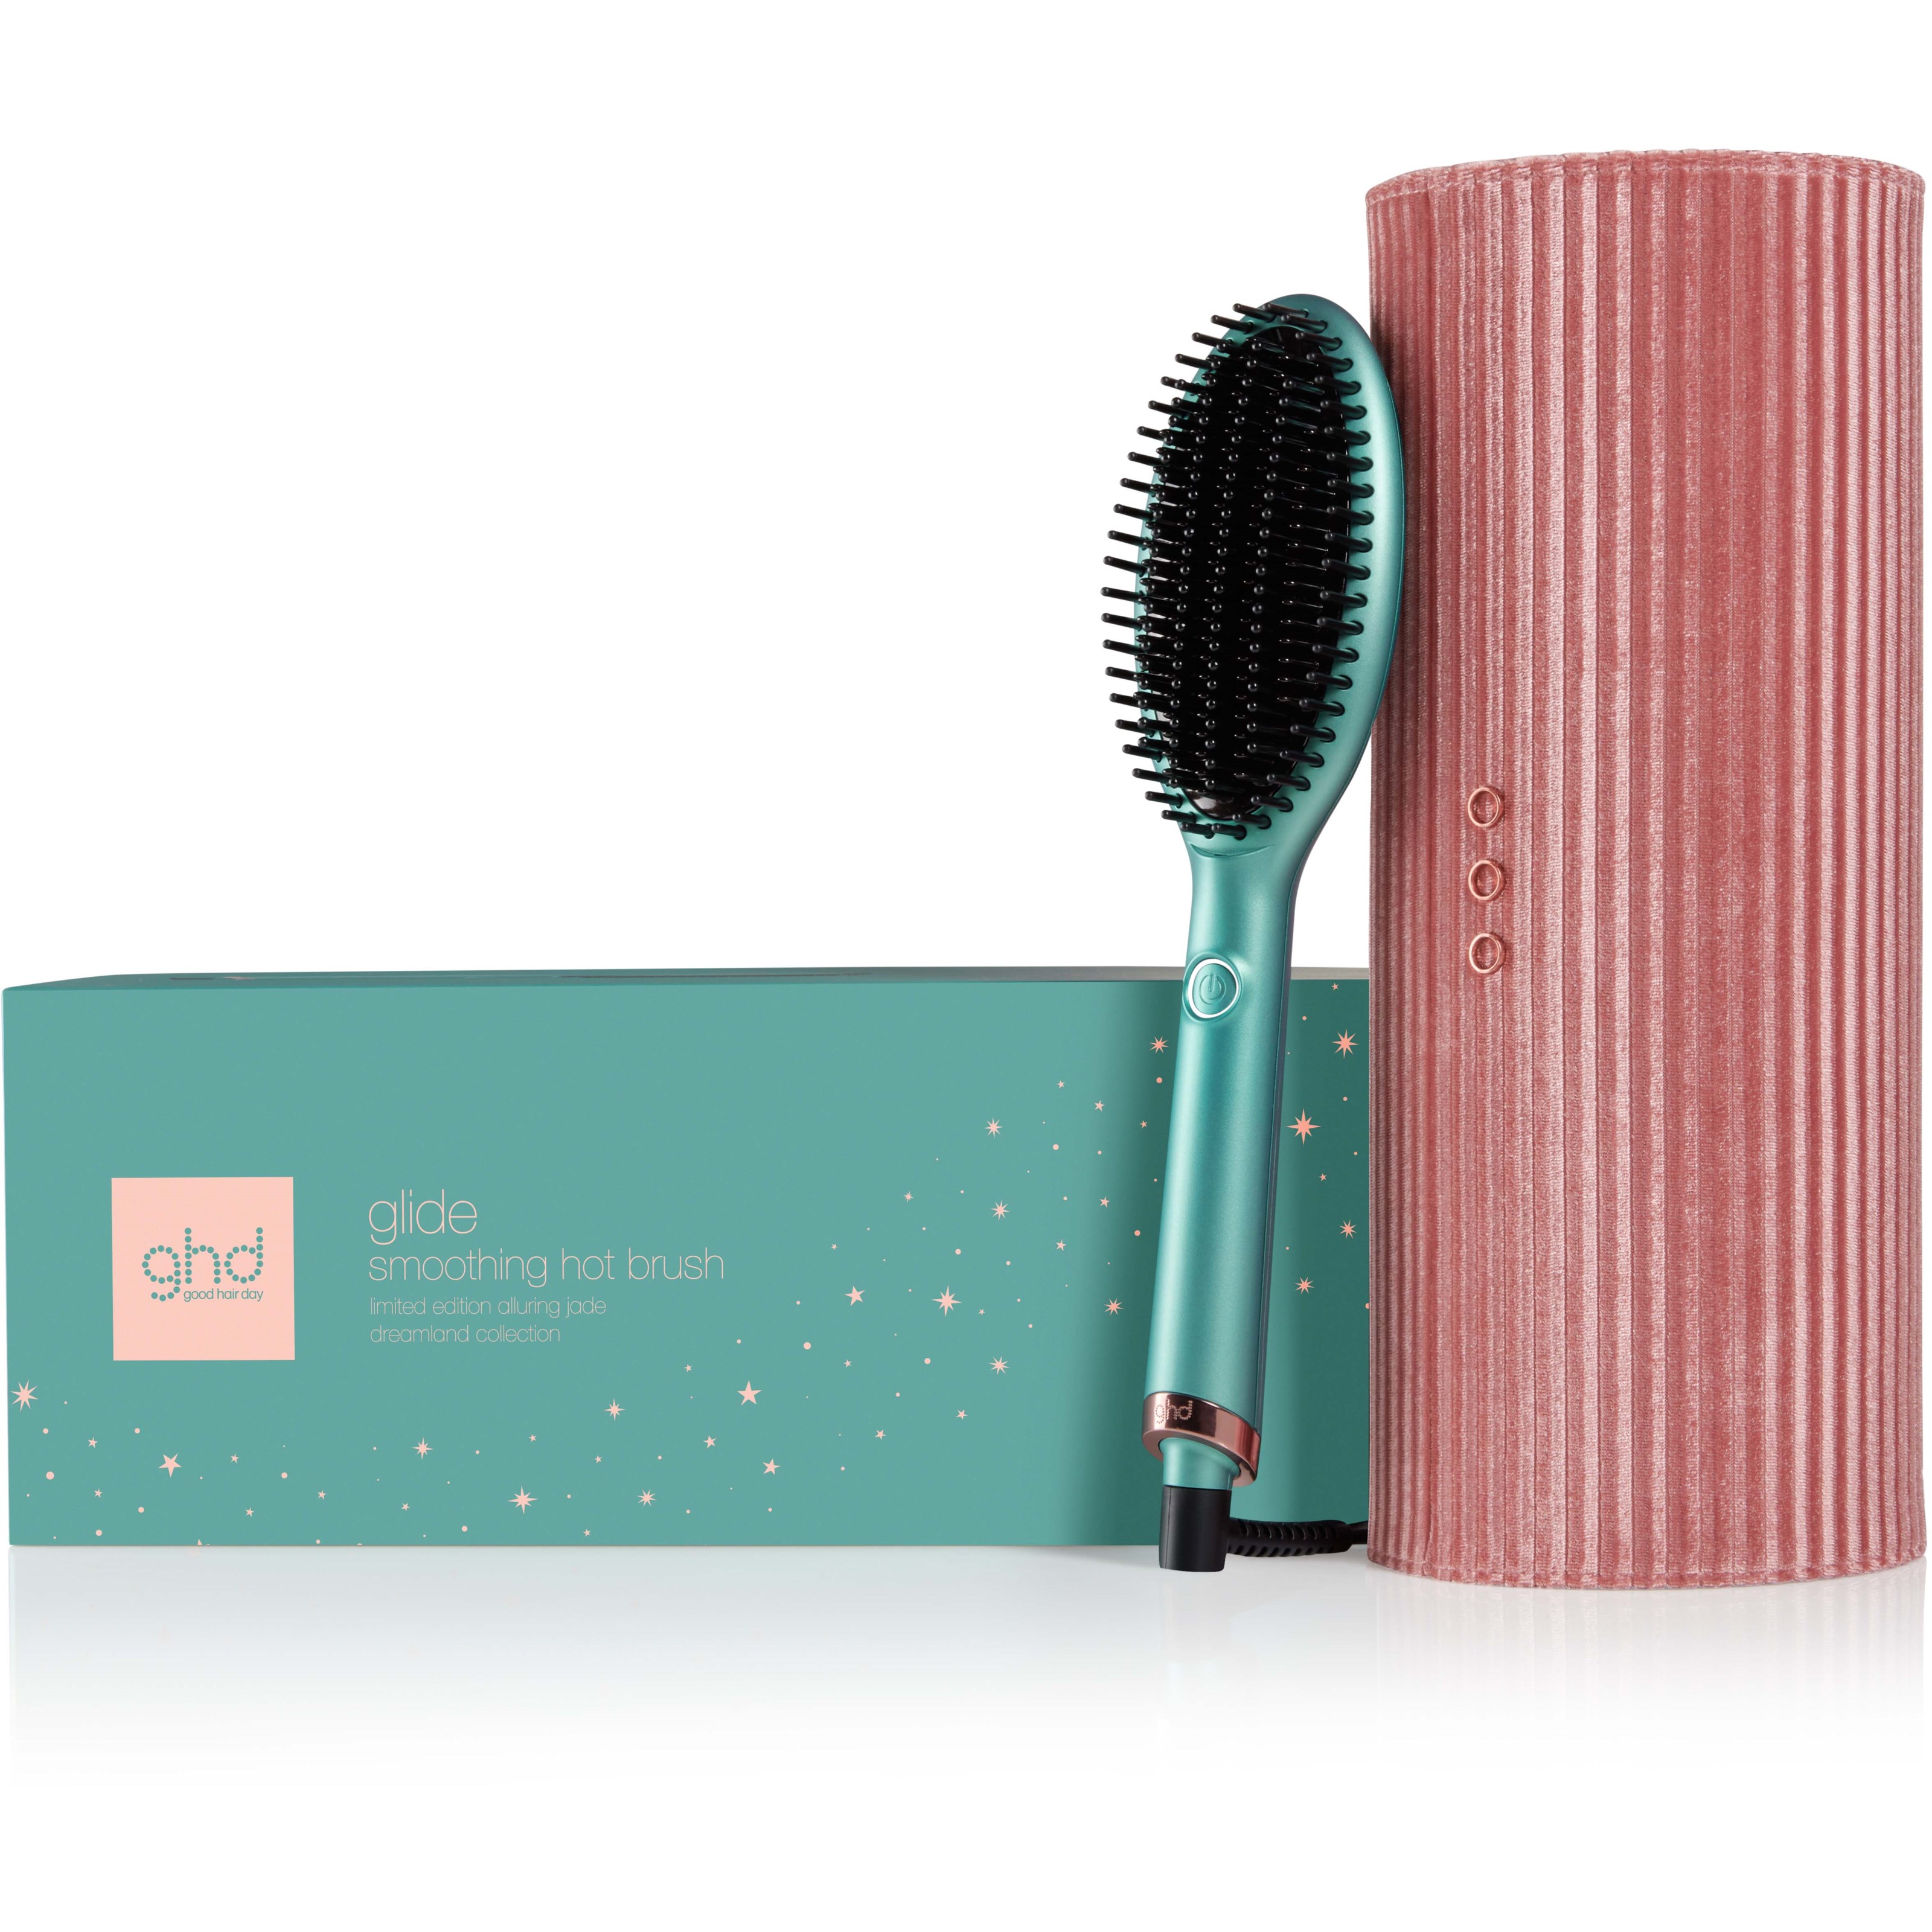 Bilde av Ghd Glide Dreamland Holiday Collection Limited Edition Gift Set